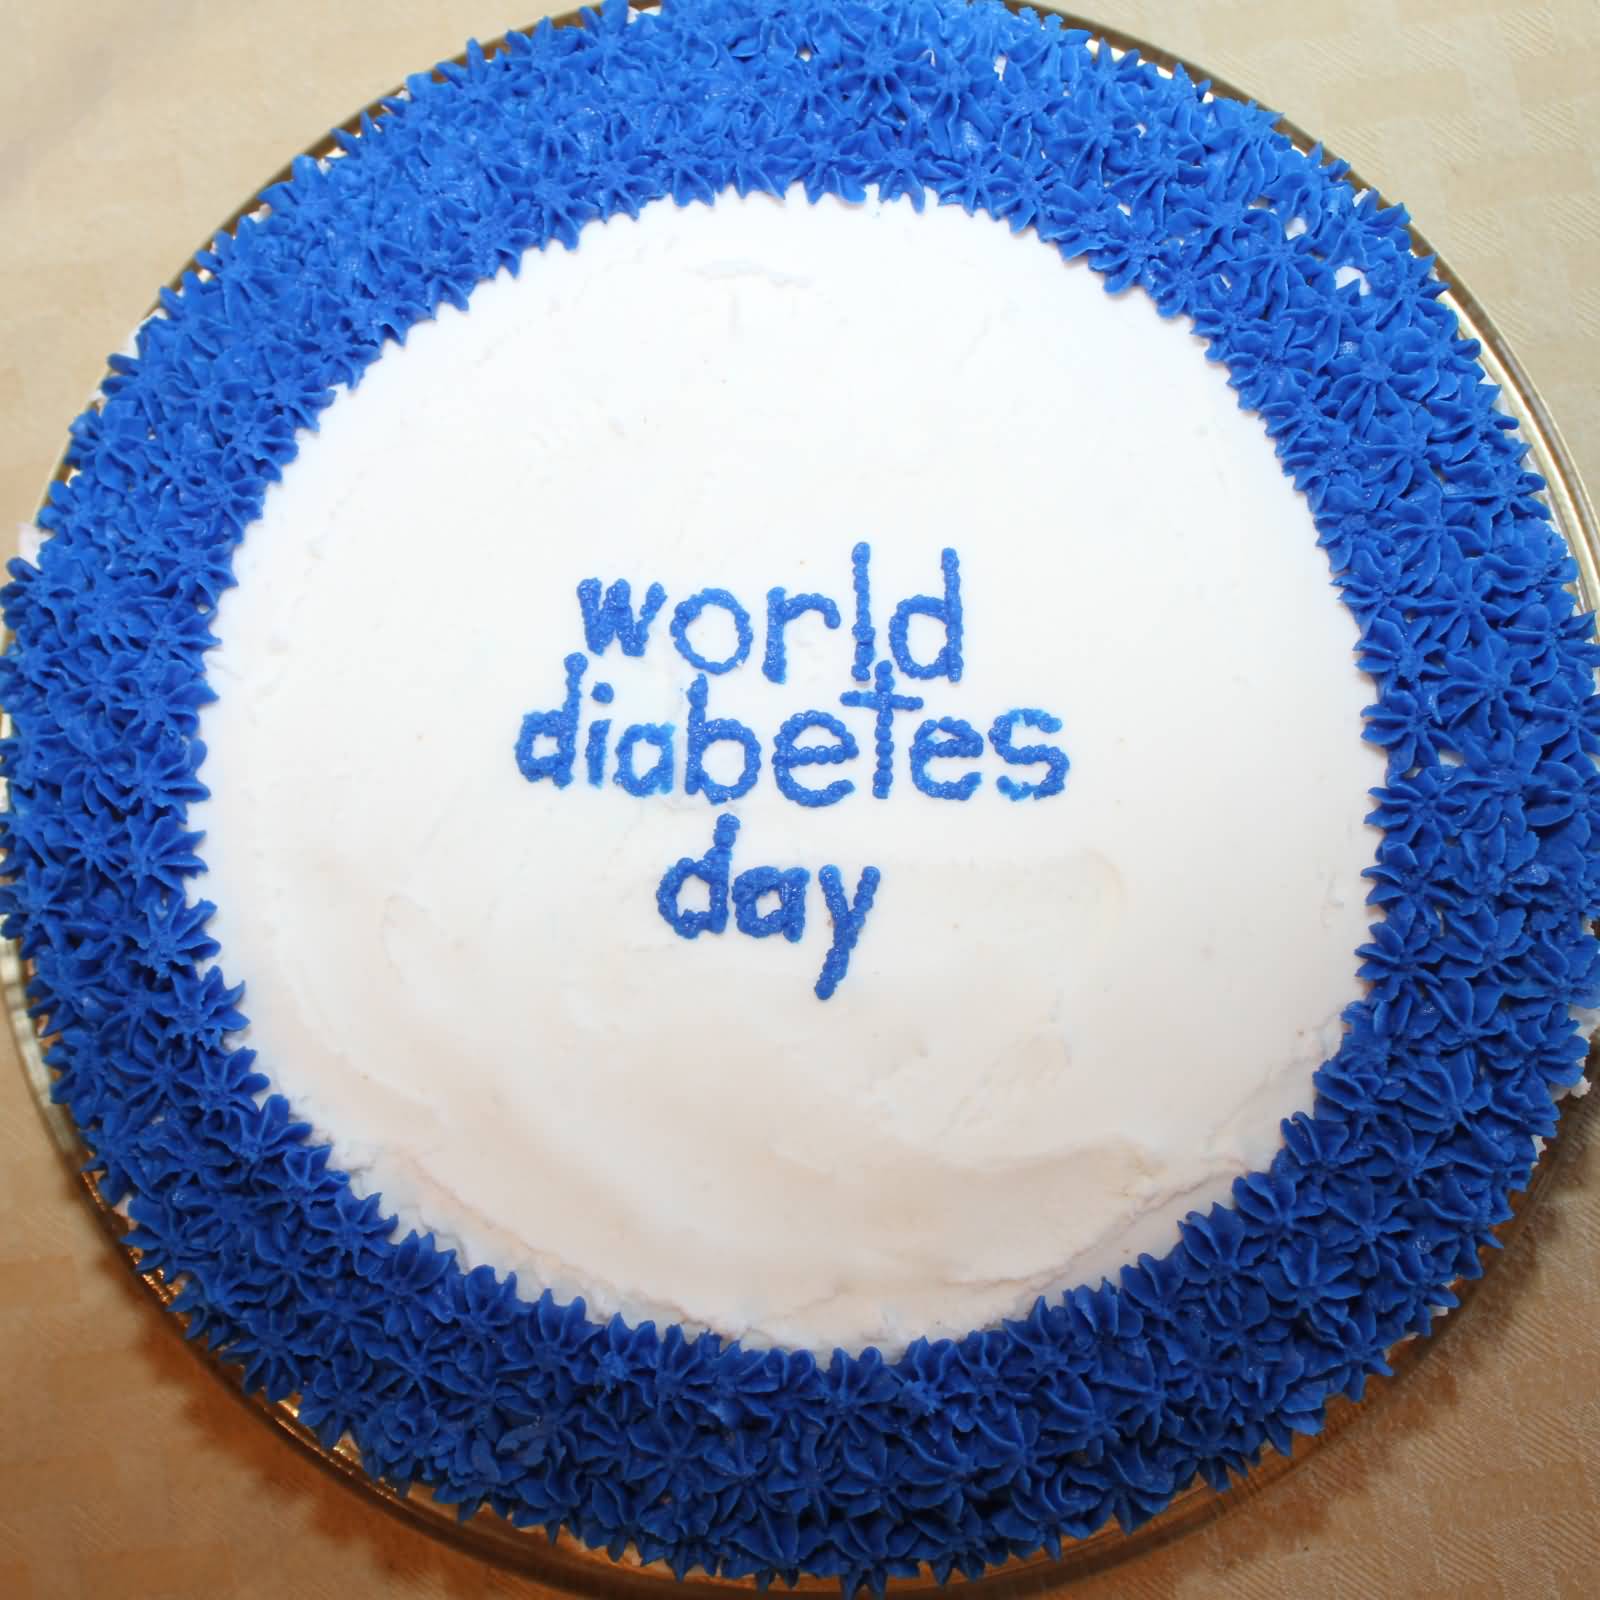 World Diabetes Day Cake Picture